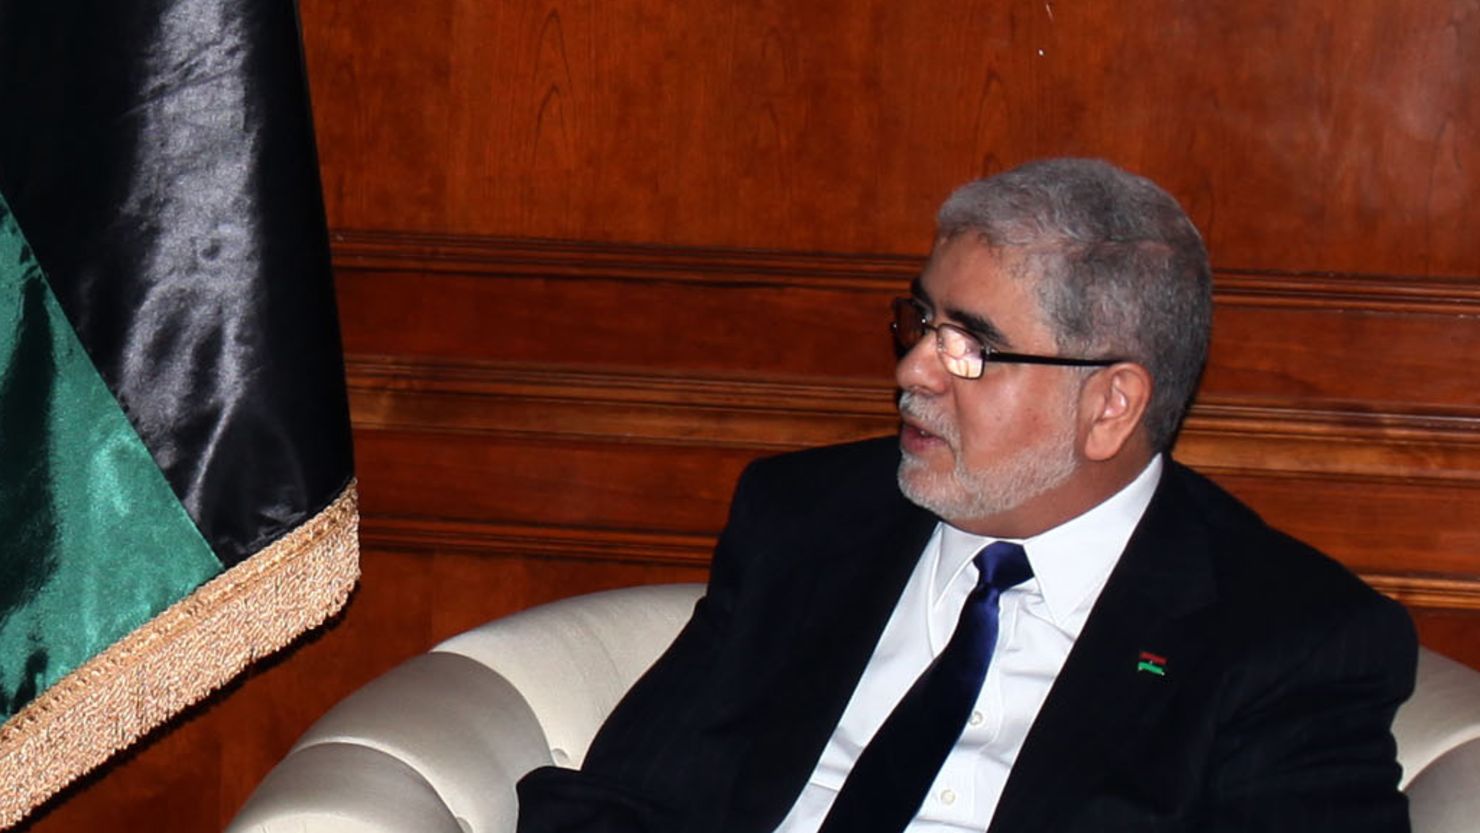 Libyan Prime Minister-elect Mustafa Abushagur proposed a downsized 10-member "crisis government" for the country.